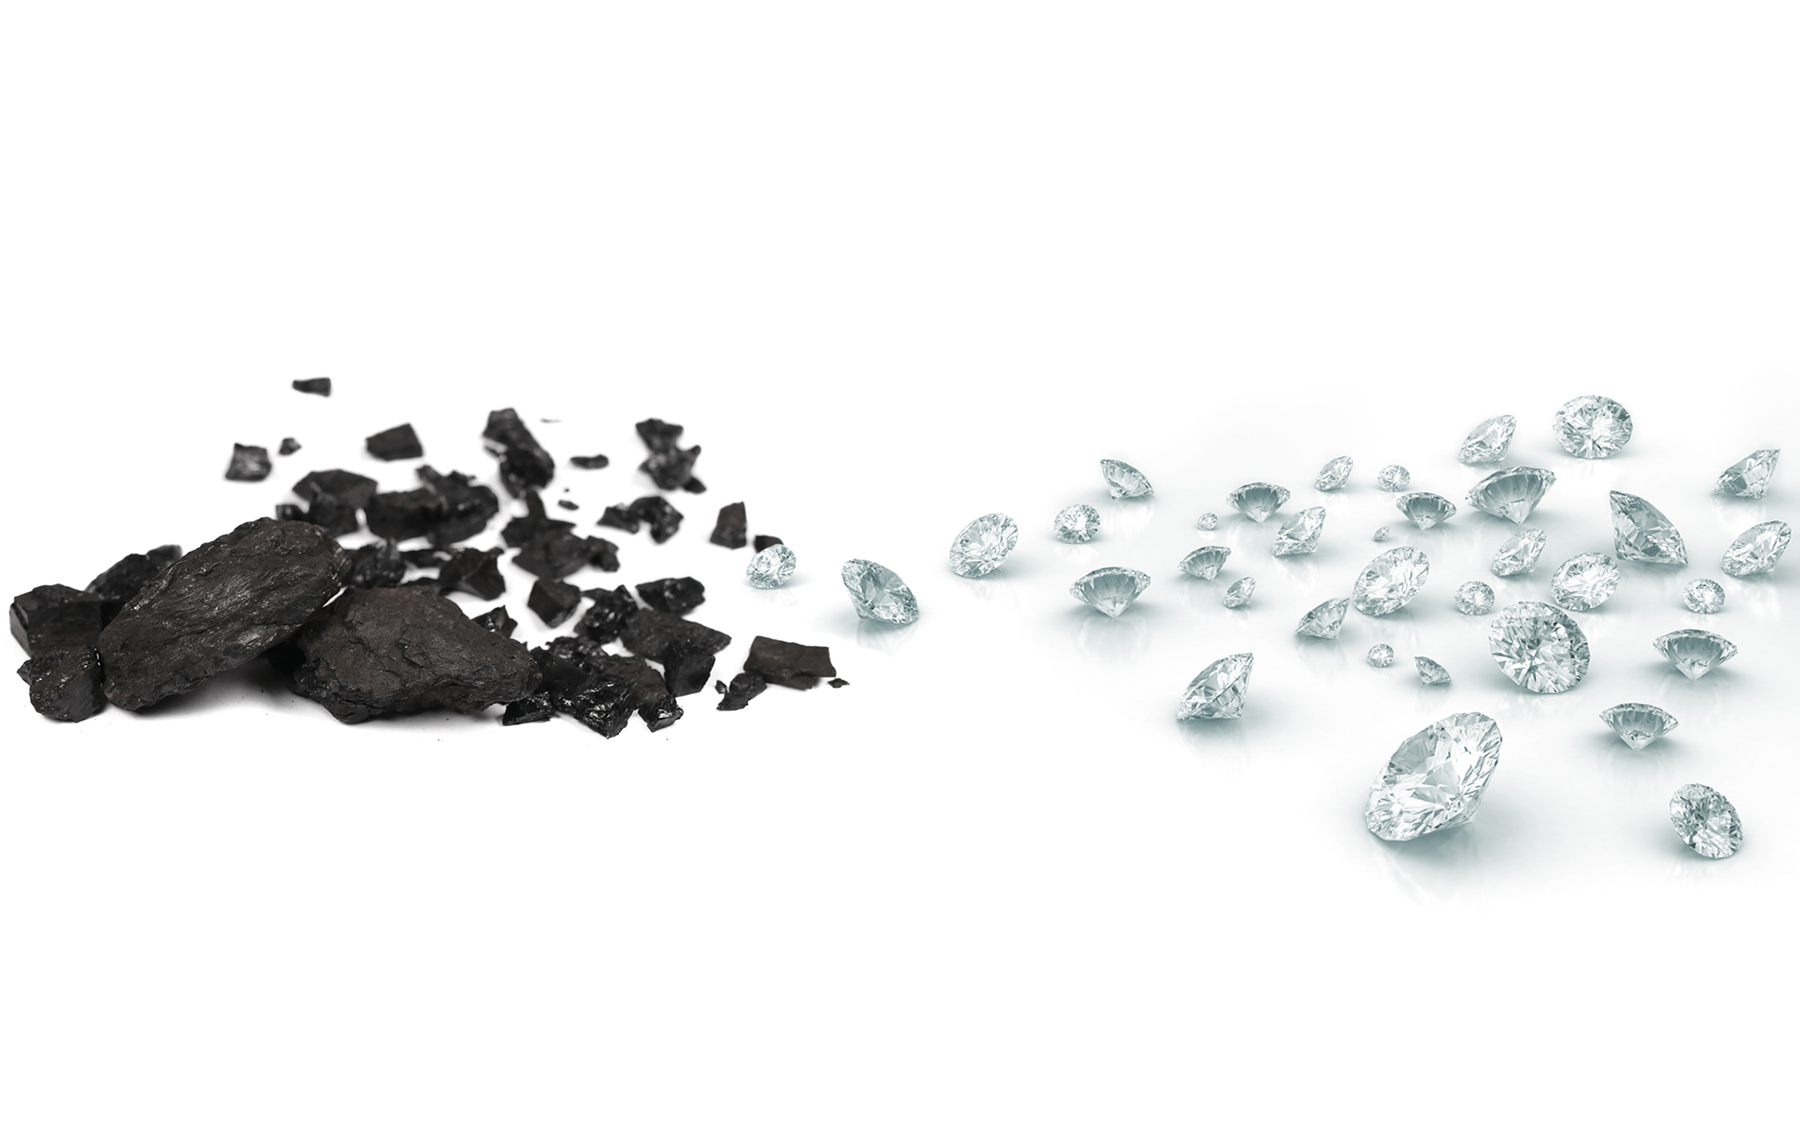 An image of a pile of coal trailing into a pile of diamonds